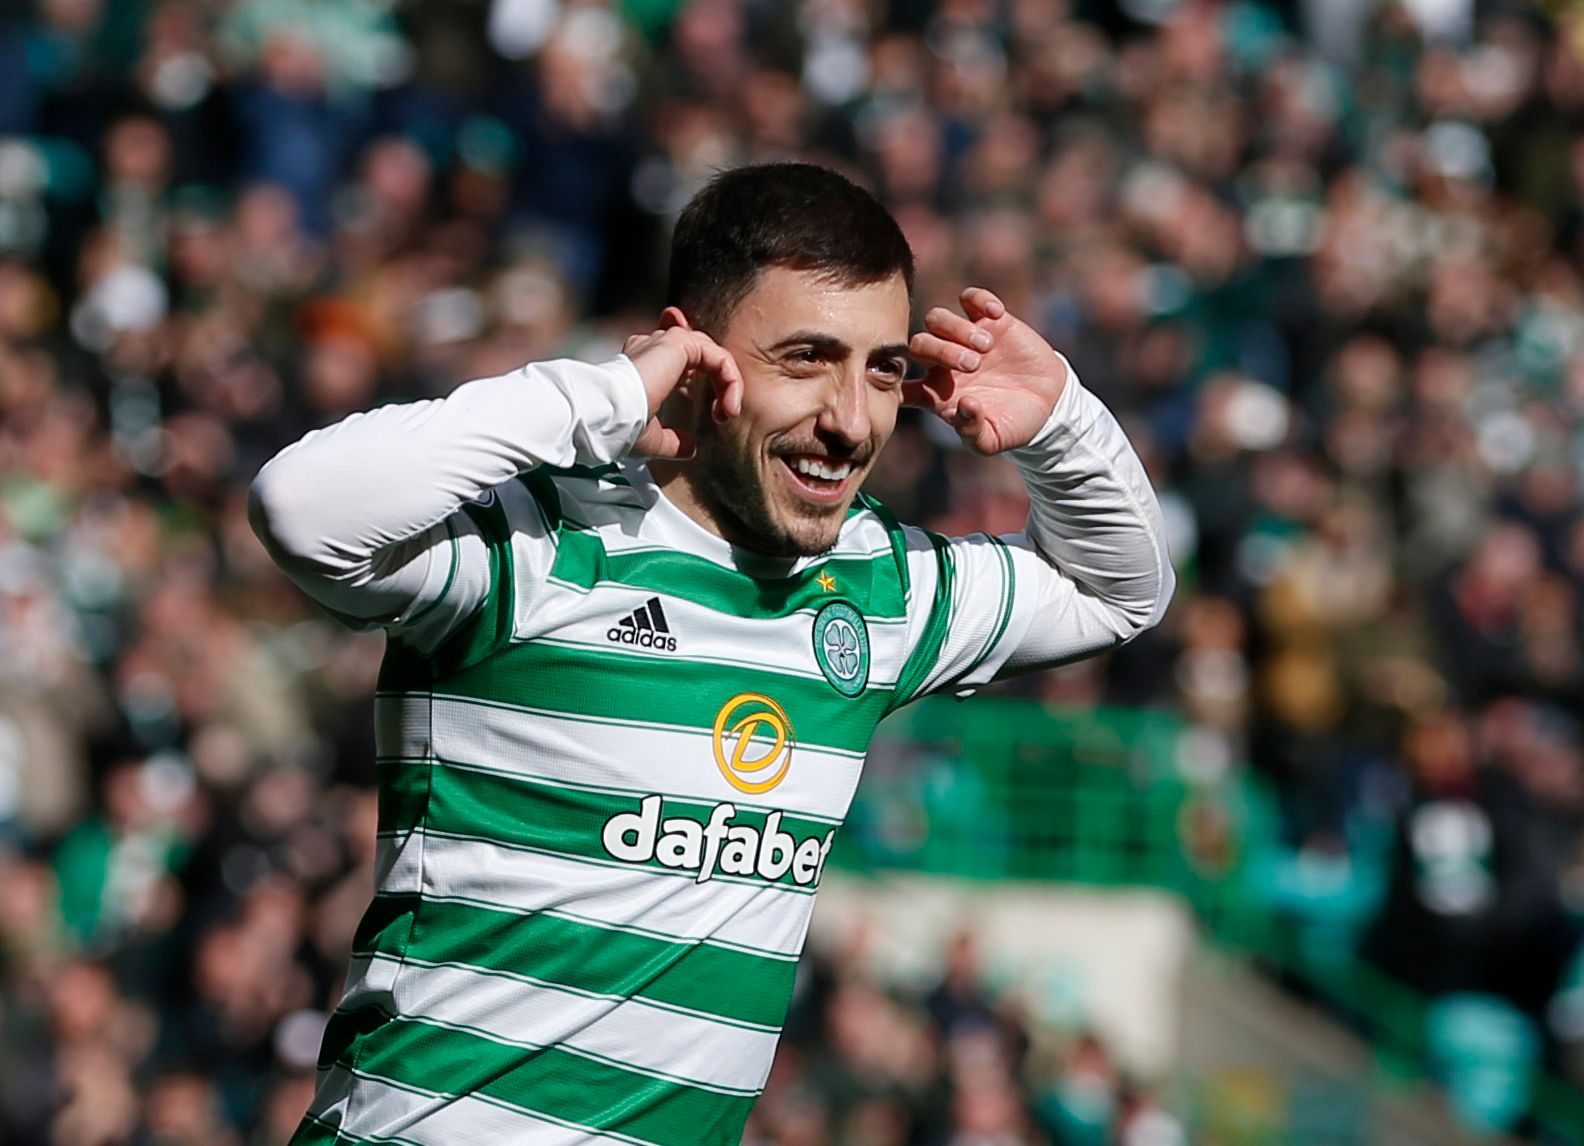 Celtic: Carton notices changes to ‘major shock’ report over potential Juranovic exit -Celtic News